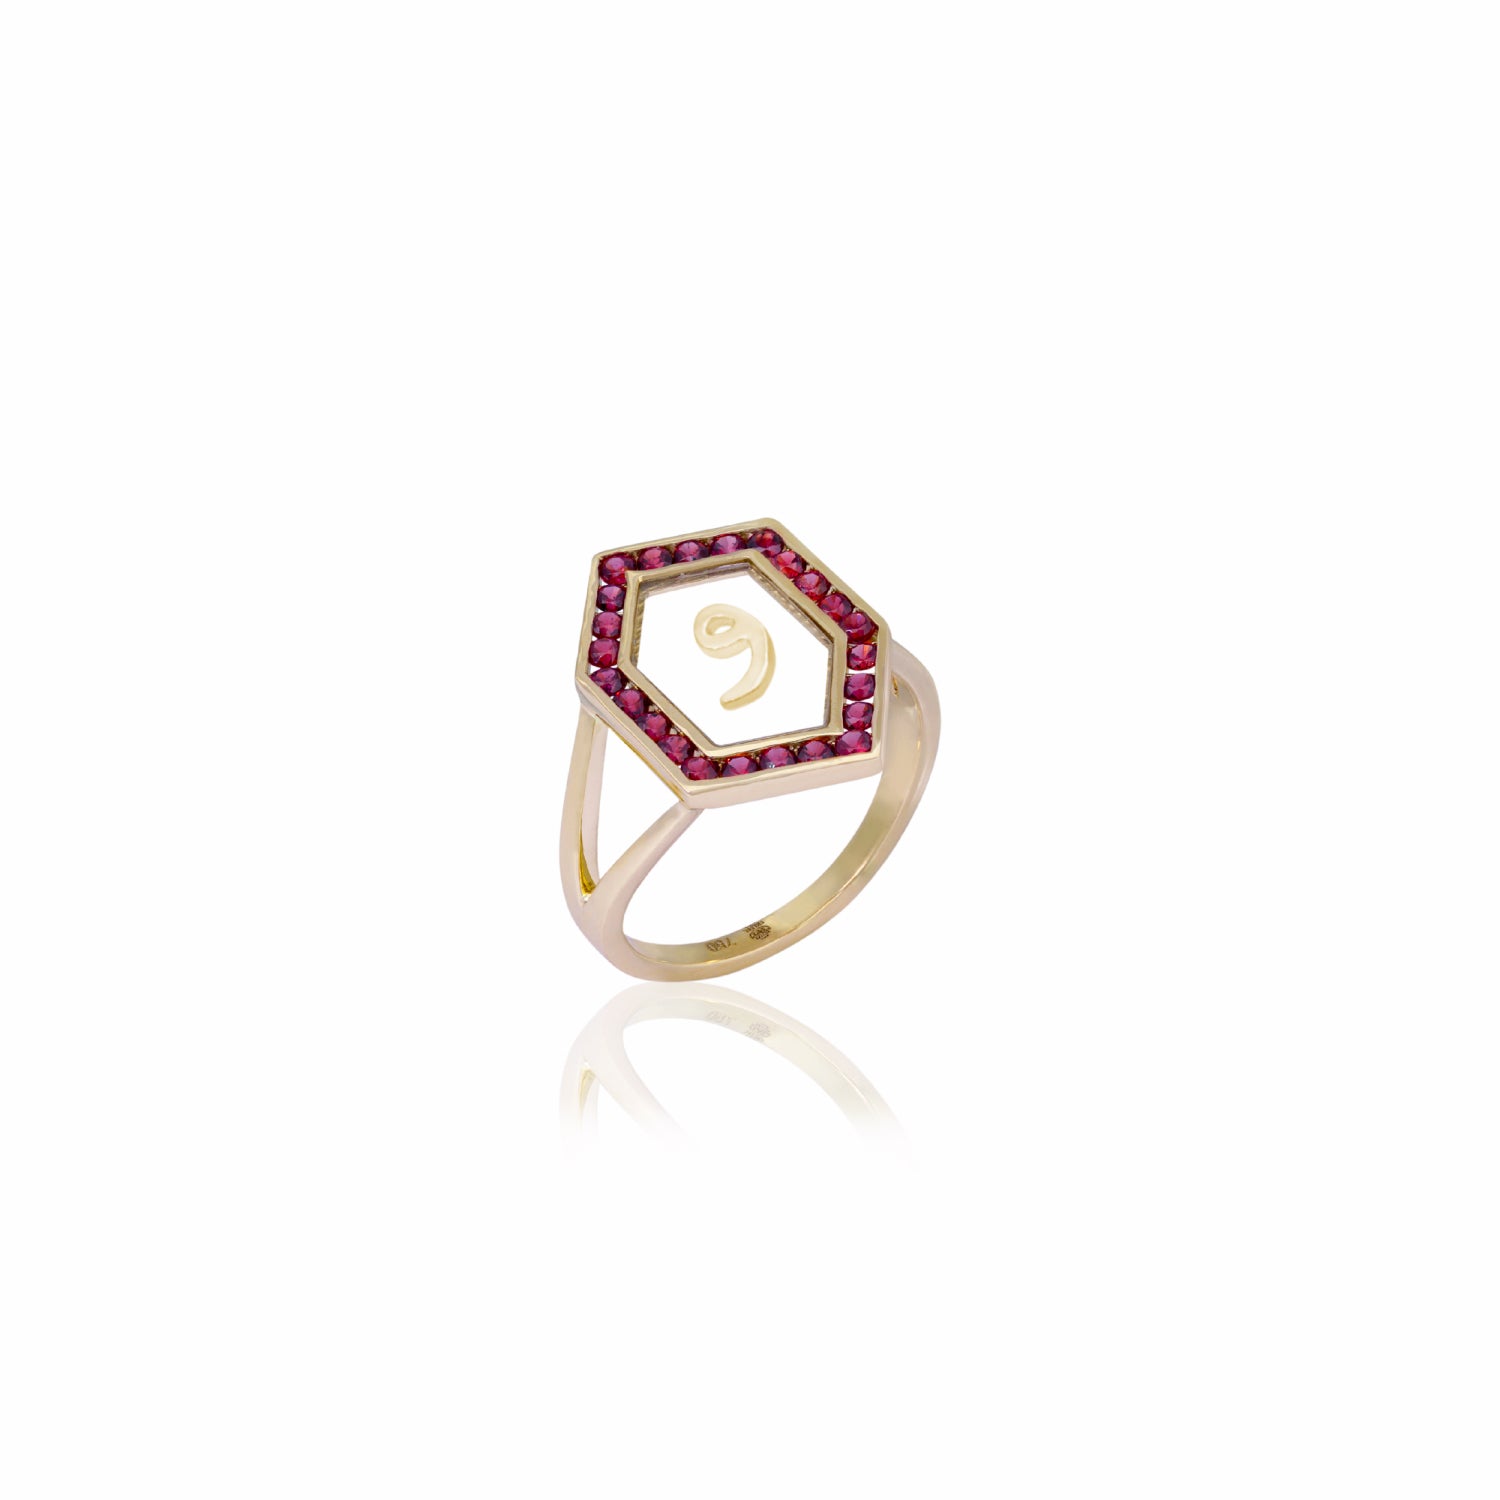 Qamoos 1.0 Letter و Ruby Ring in Yellow Gold